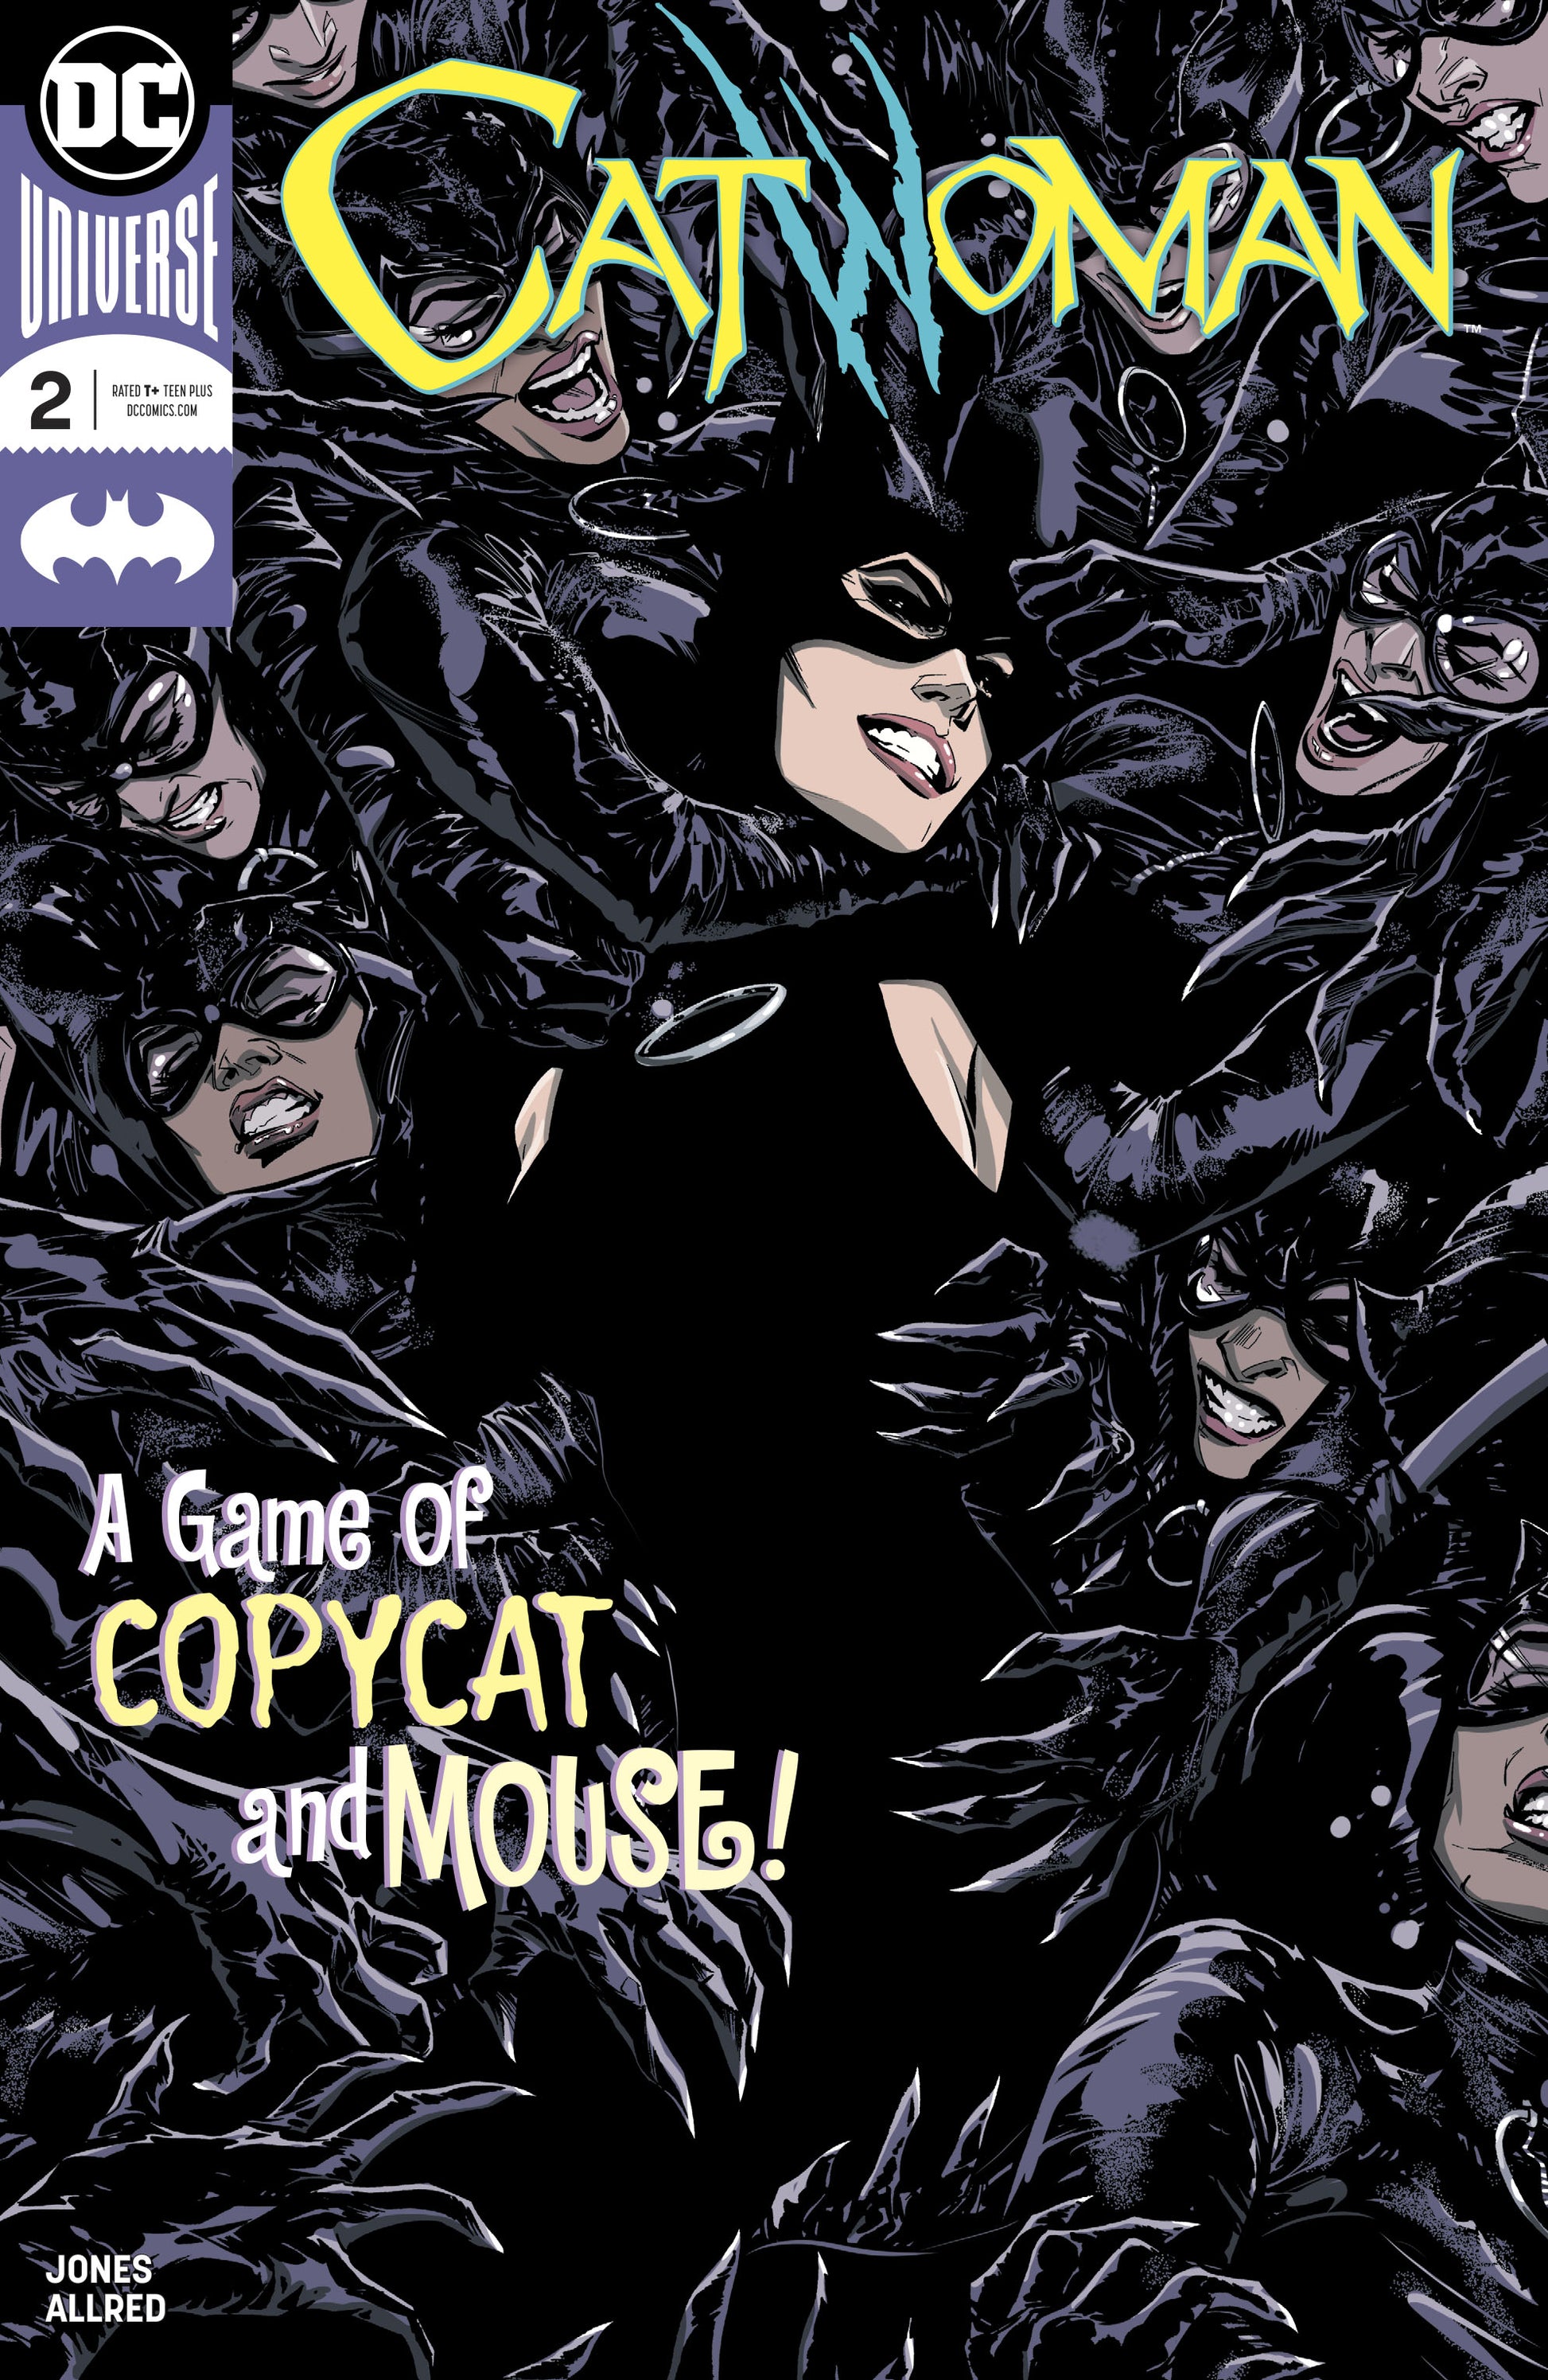 CATWOMAN #2 COVER